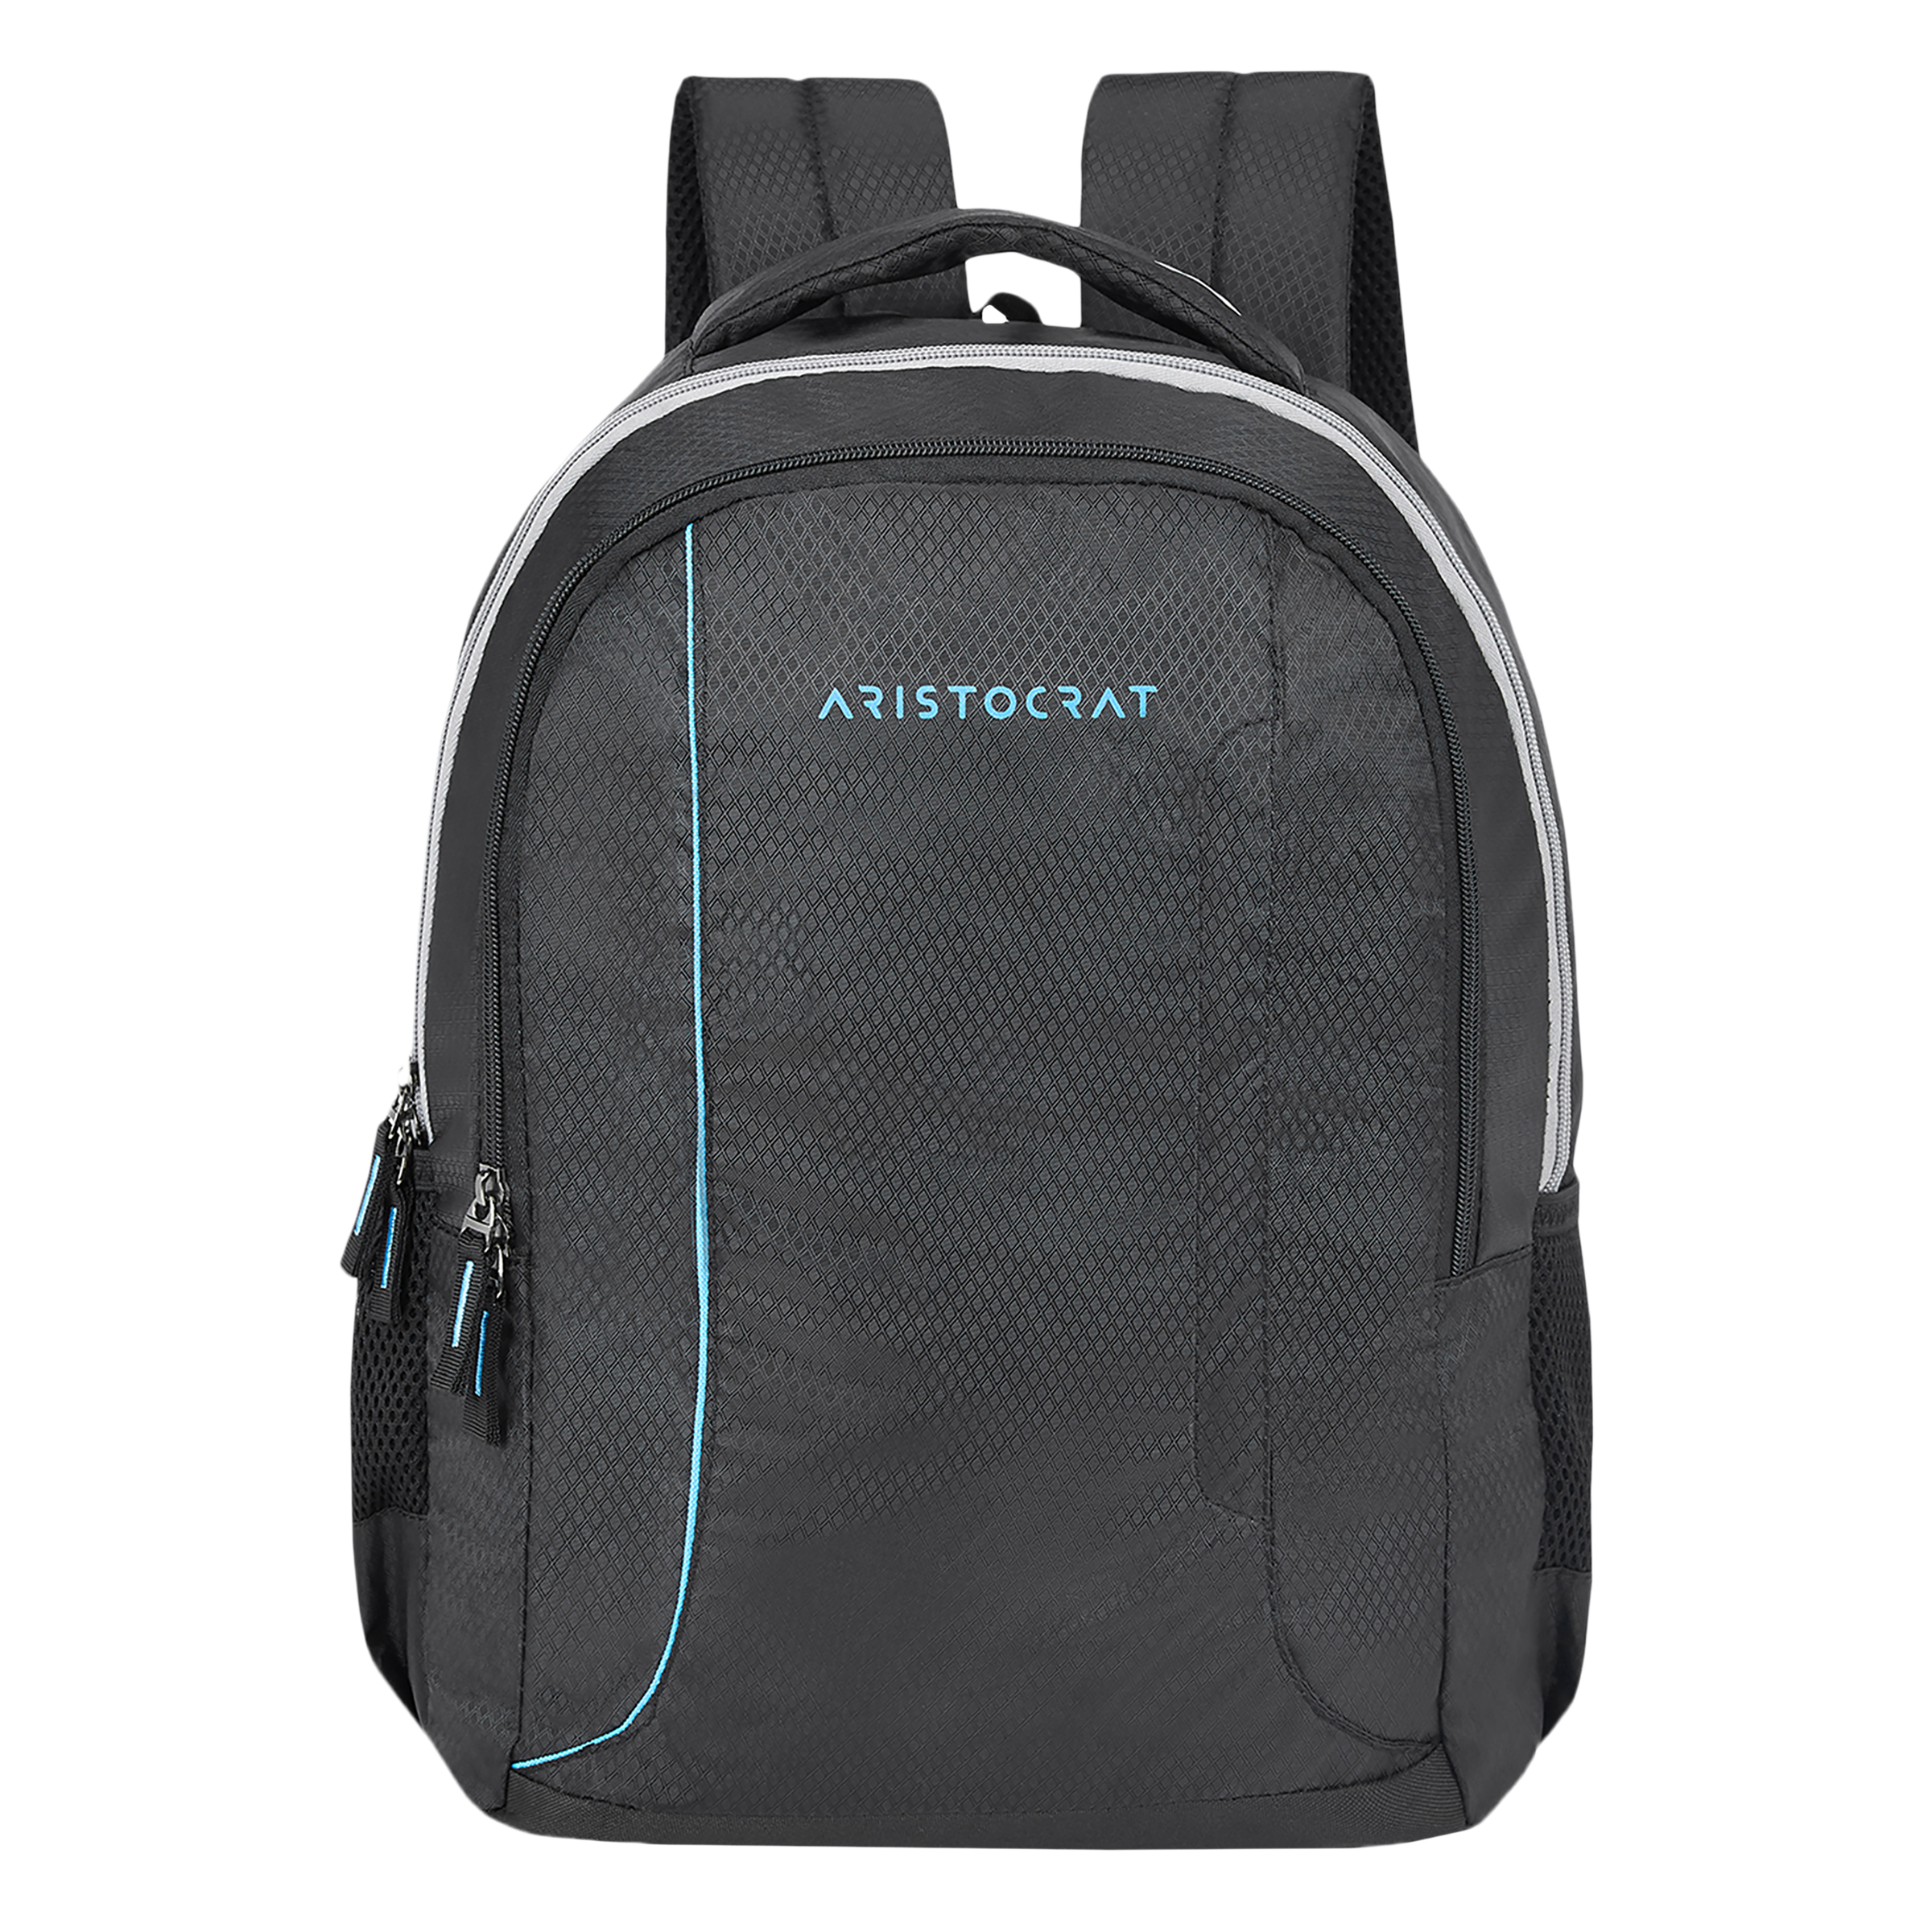 Aristocrat Regal Laptop Backpack (E) Blue Height 19 Inches Online in India,  Buy at Best Price from Firstcry.com - 13119507